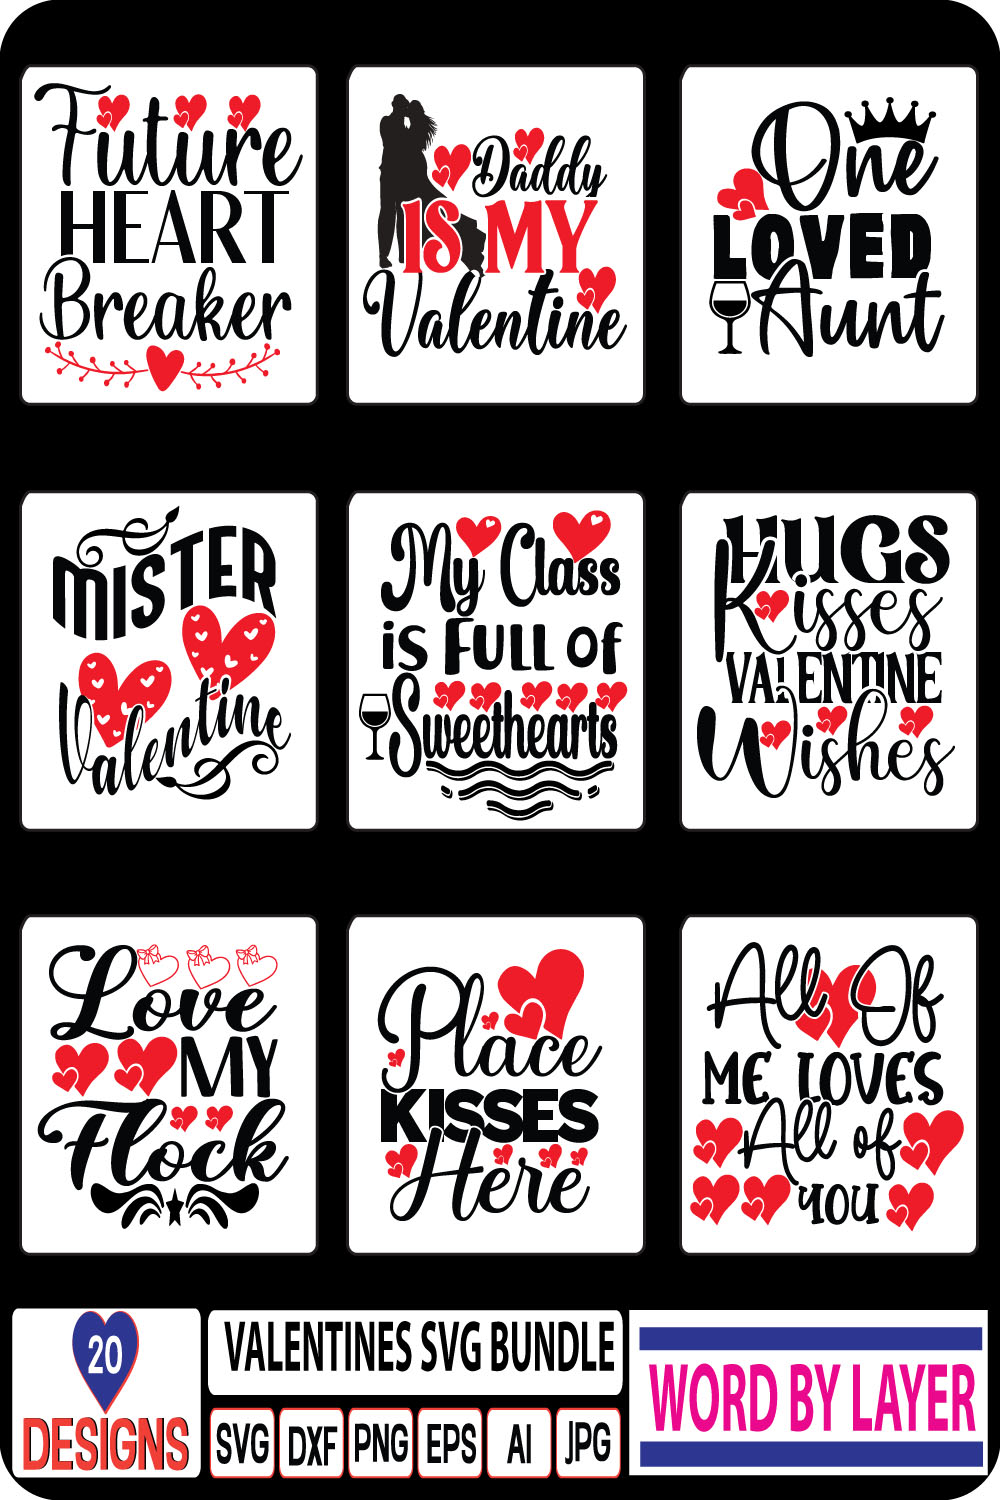 A pack of enchanting images for prints on the theme of Valentines Day.